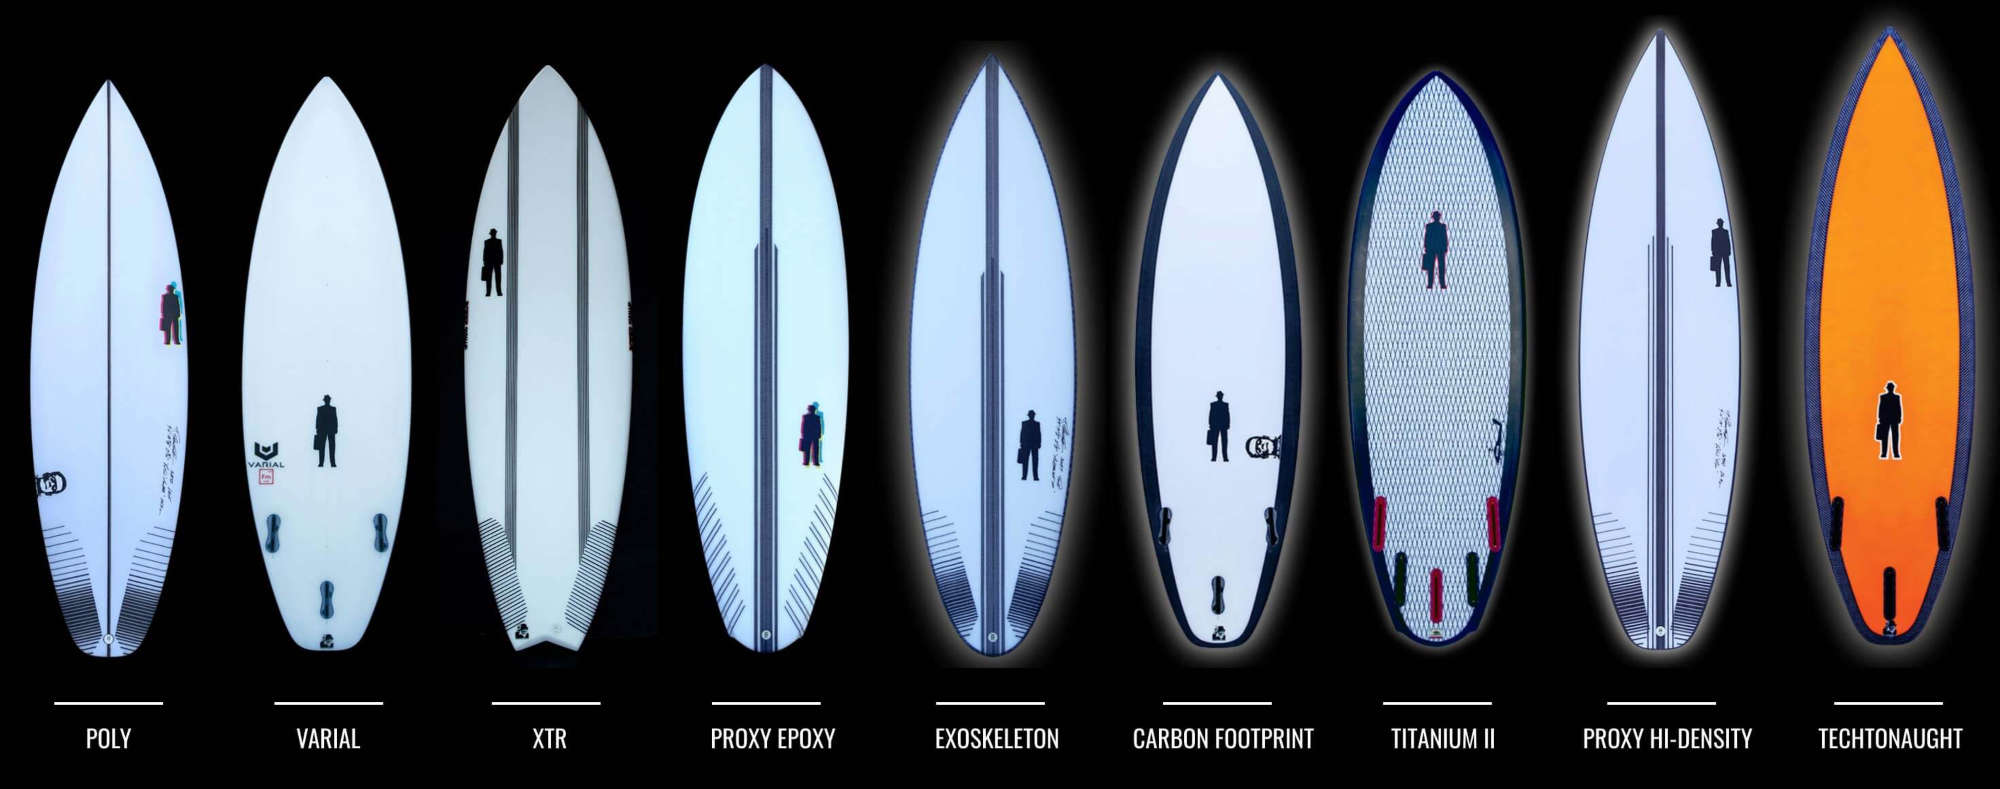 surfboard construction options from proctor surfboards including poly, epoxy, carbon footprint, techtonaught and more